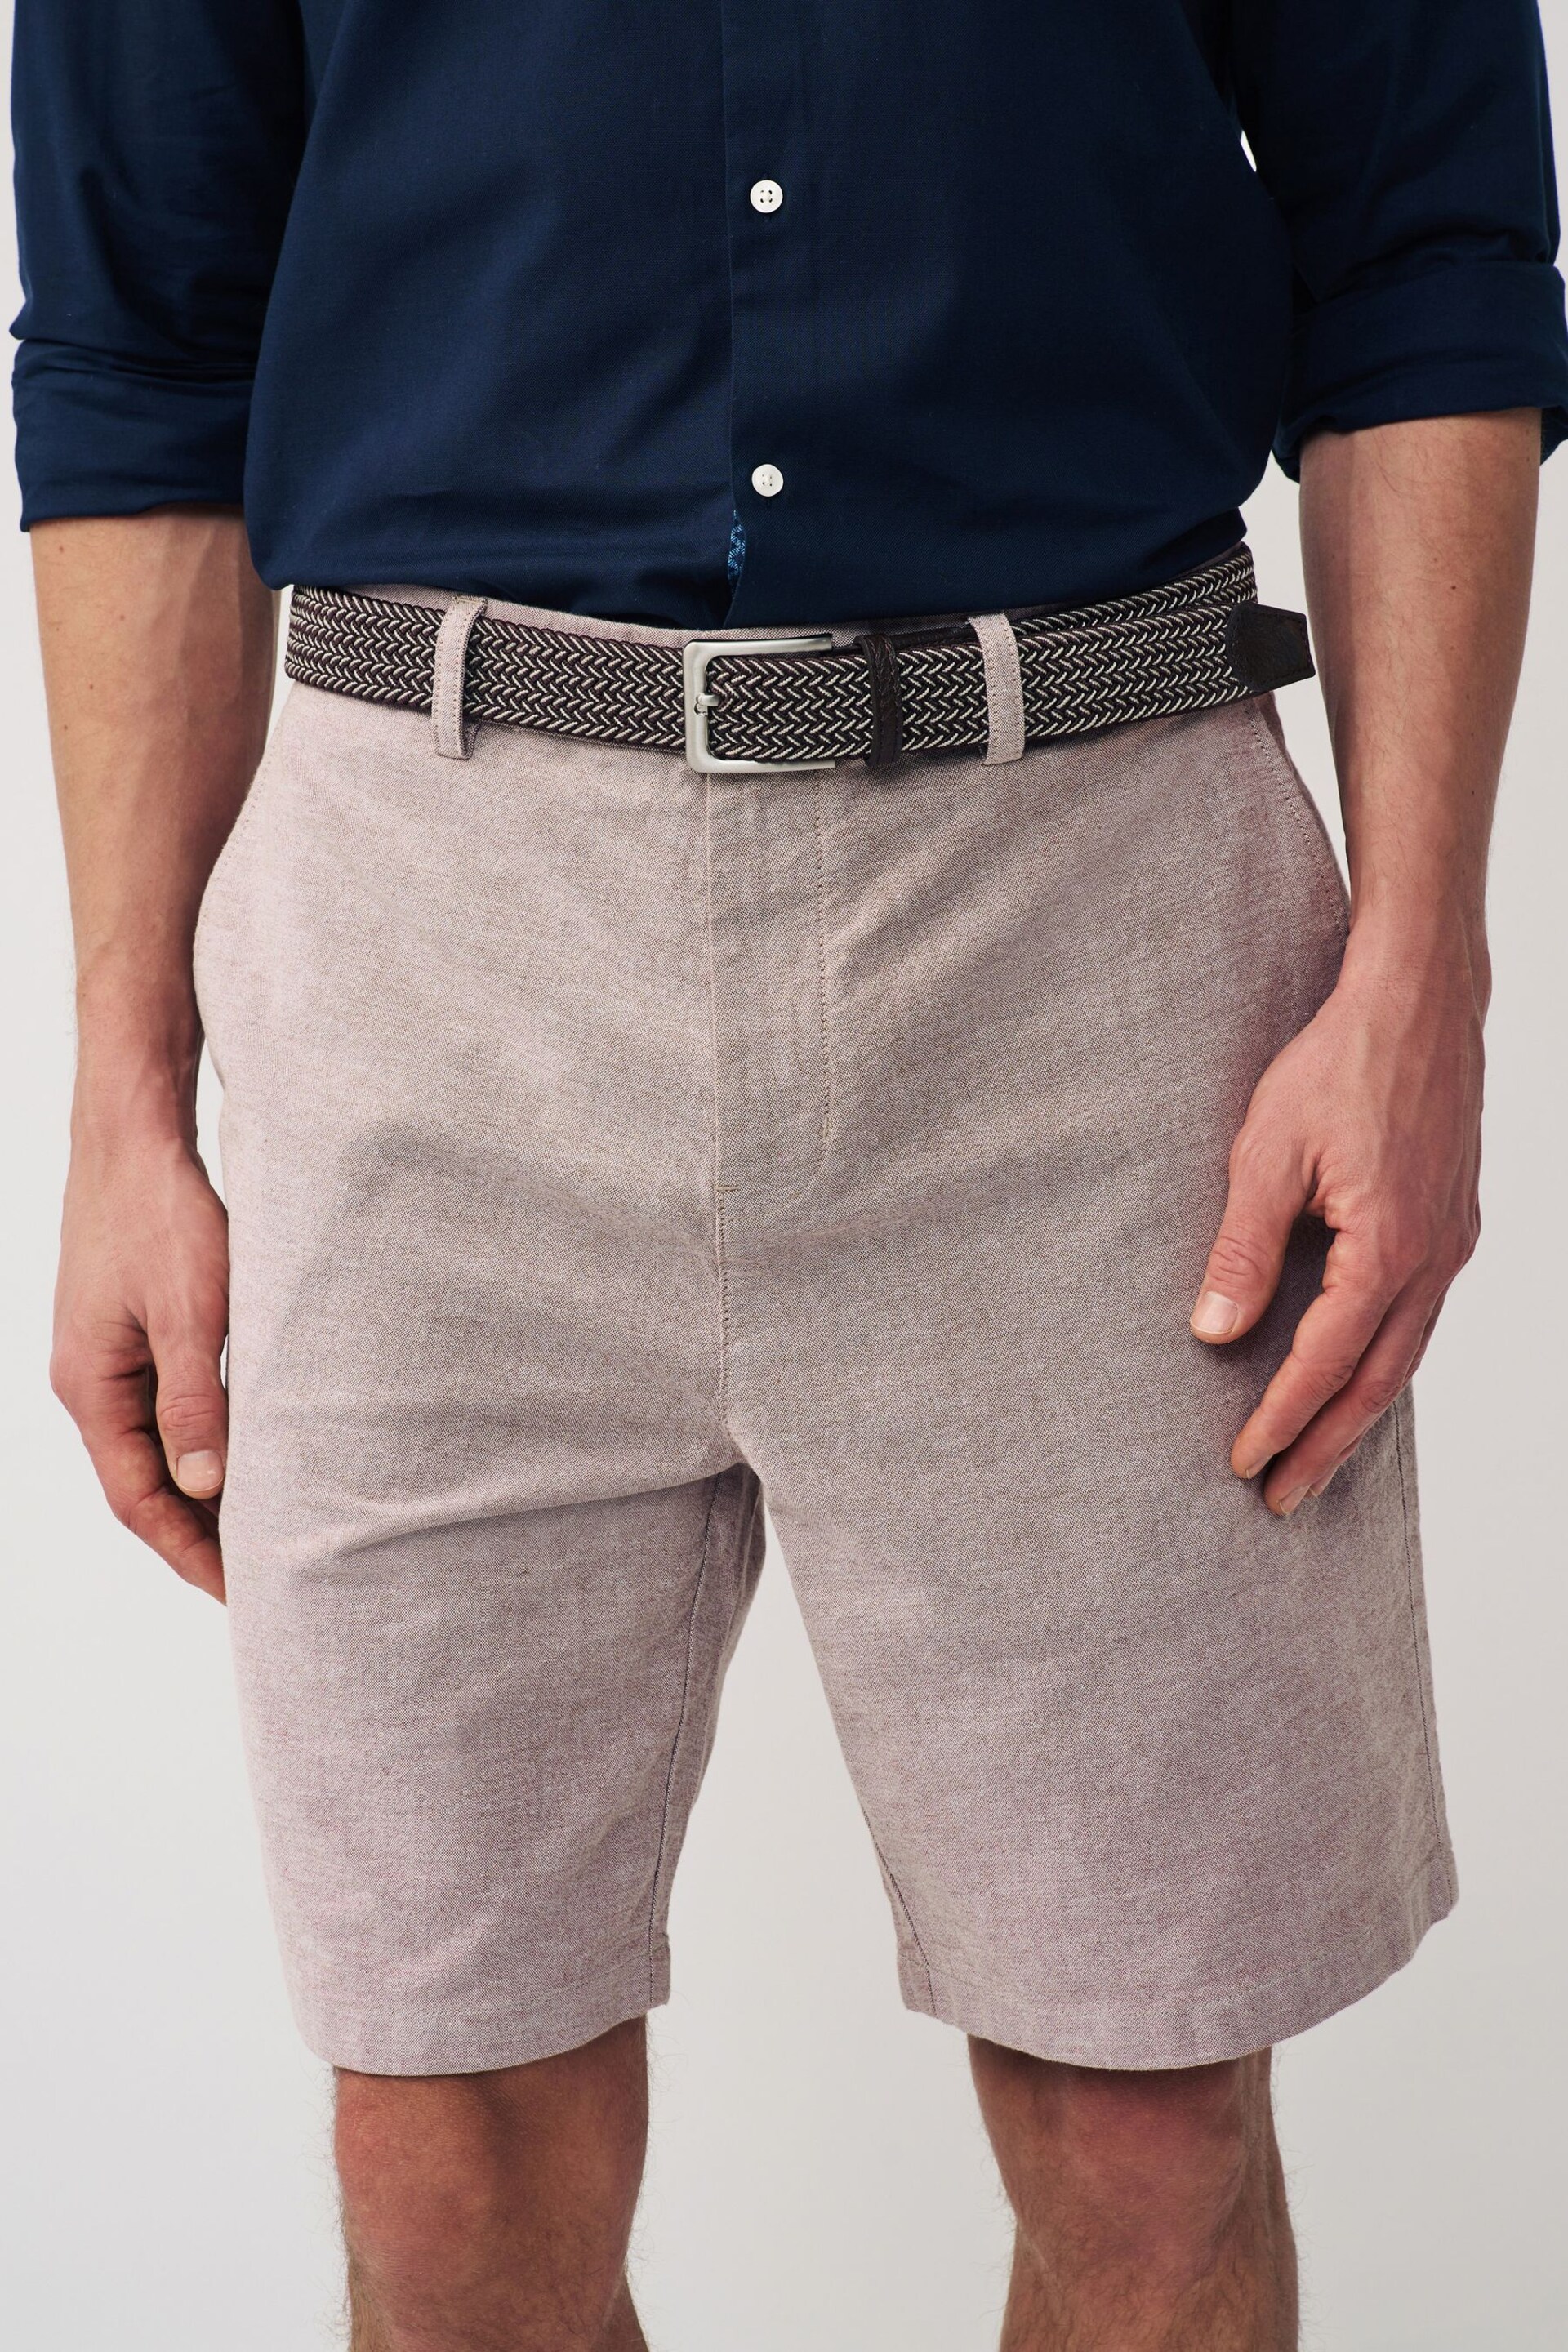 Clay Cotton Oxford Chino Shorts with Belt Included - Image 1 of 7